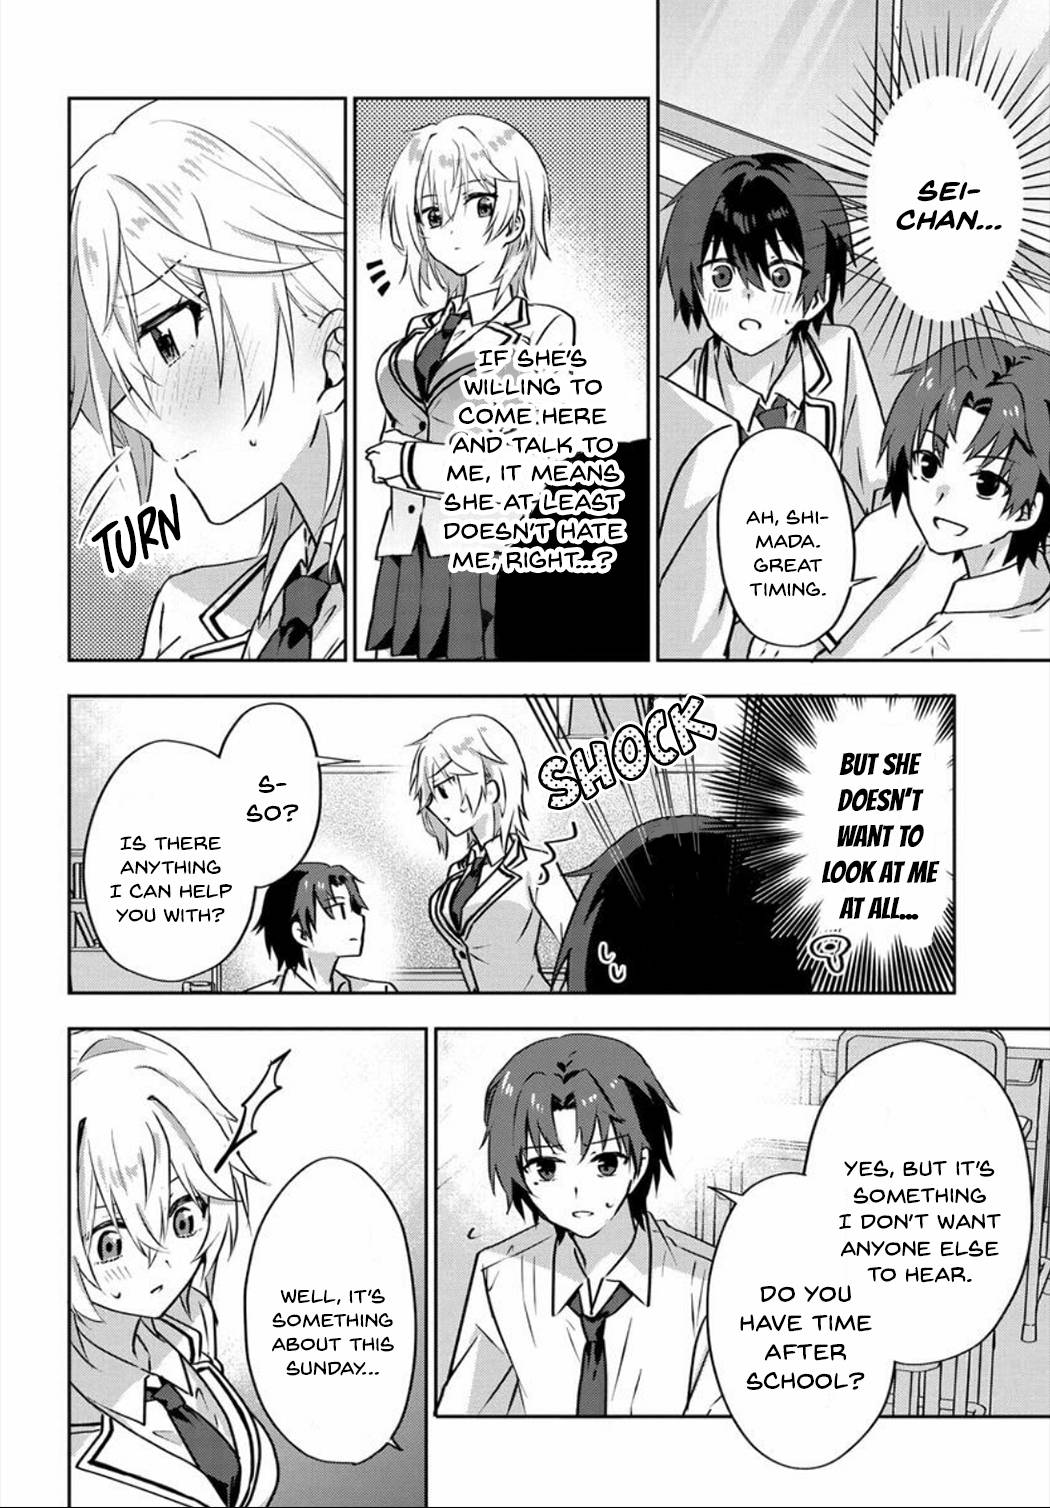 Since I’Ve Entered The World Of Romantic Comedy Manga, I’Ll Do My Best To Make The Losing Heroine Happy Chapter 3.2 #5